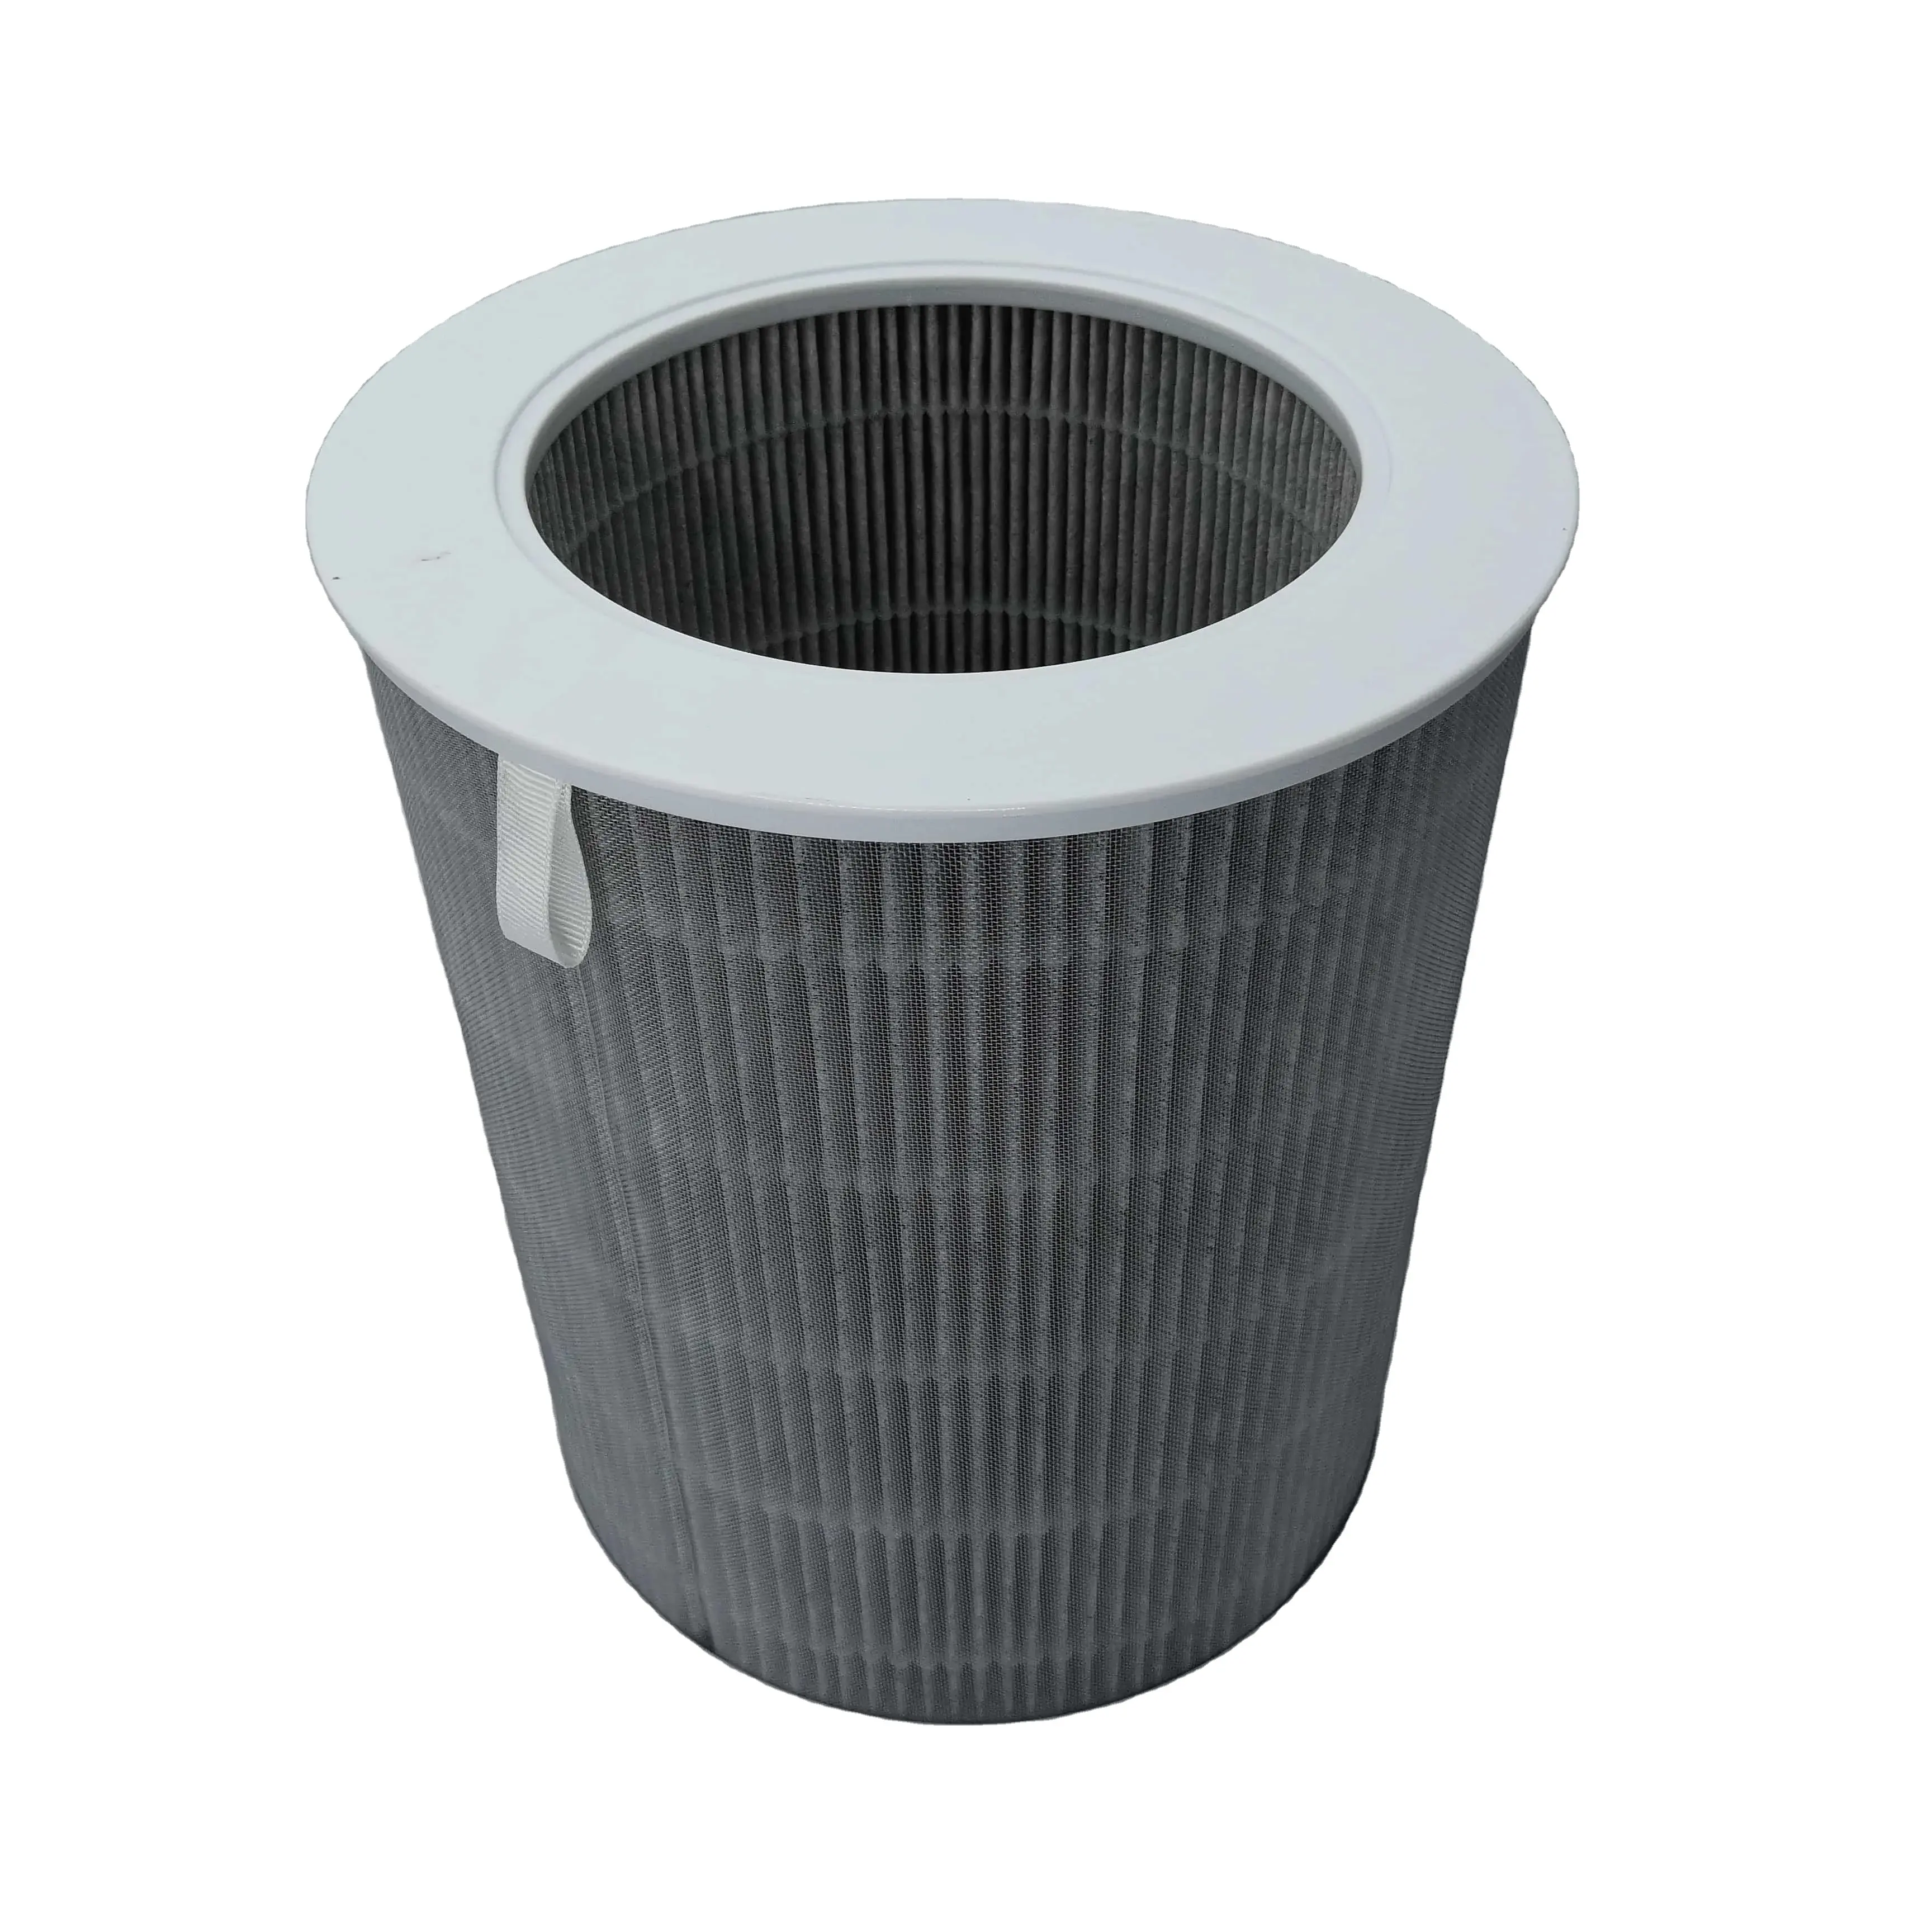 OEM ODM Customized Activated Carbon Cartridge Panel Air HEPA Filter for Air Purifier Parts